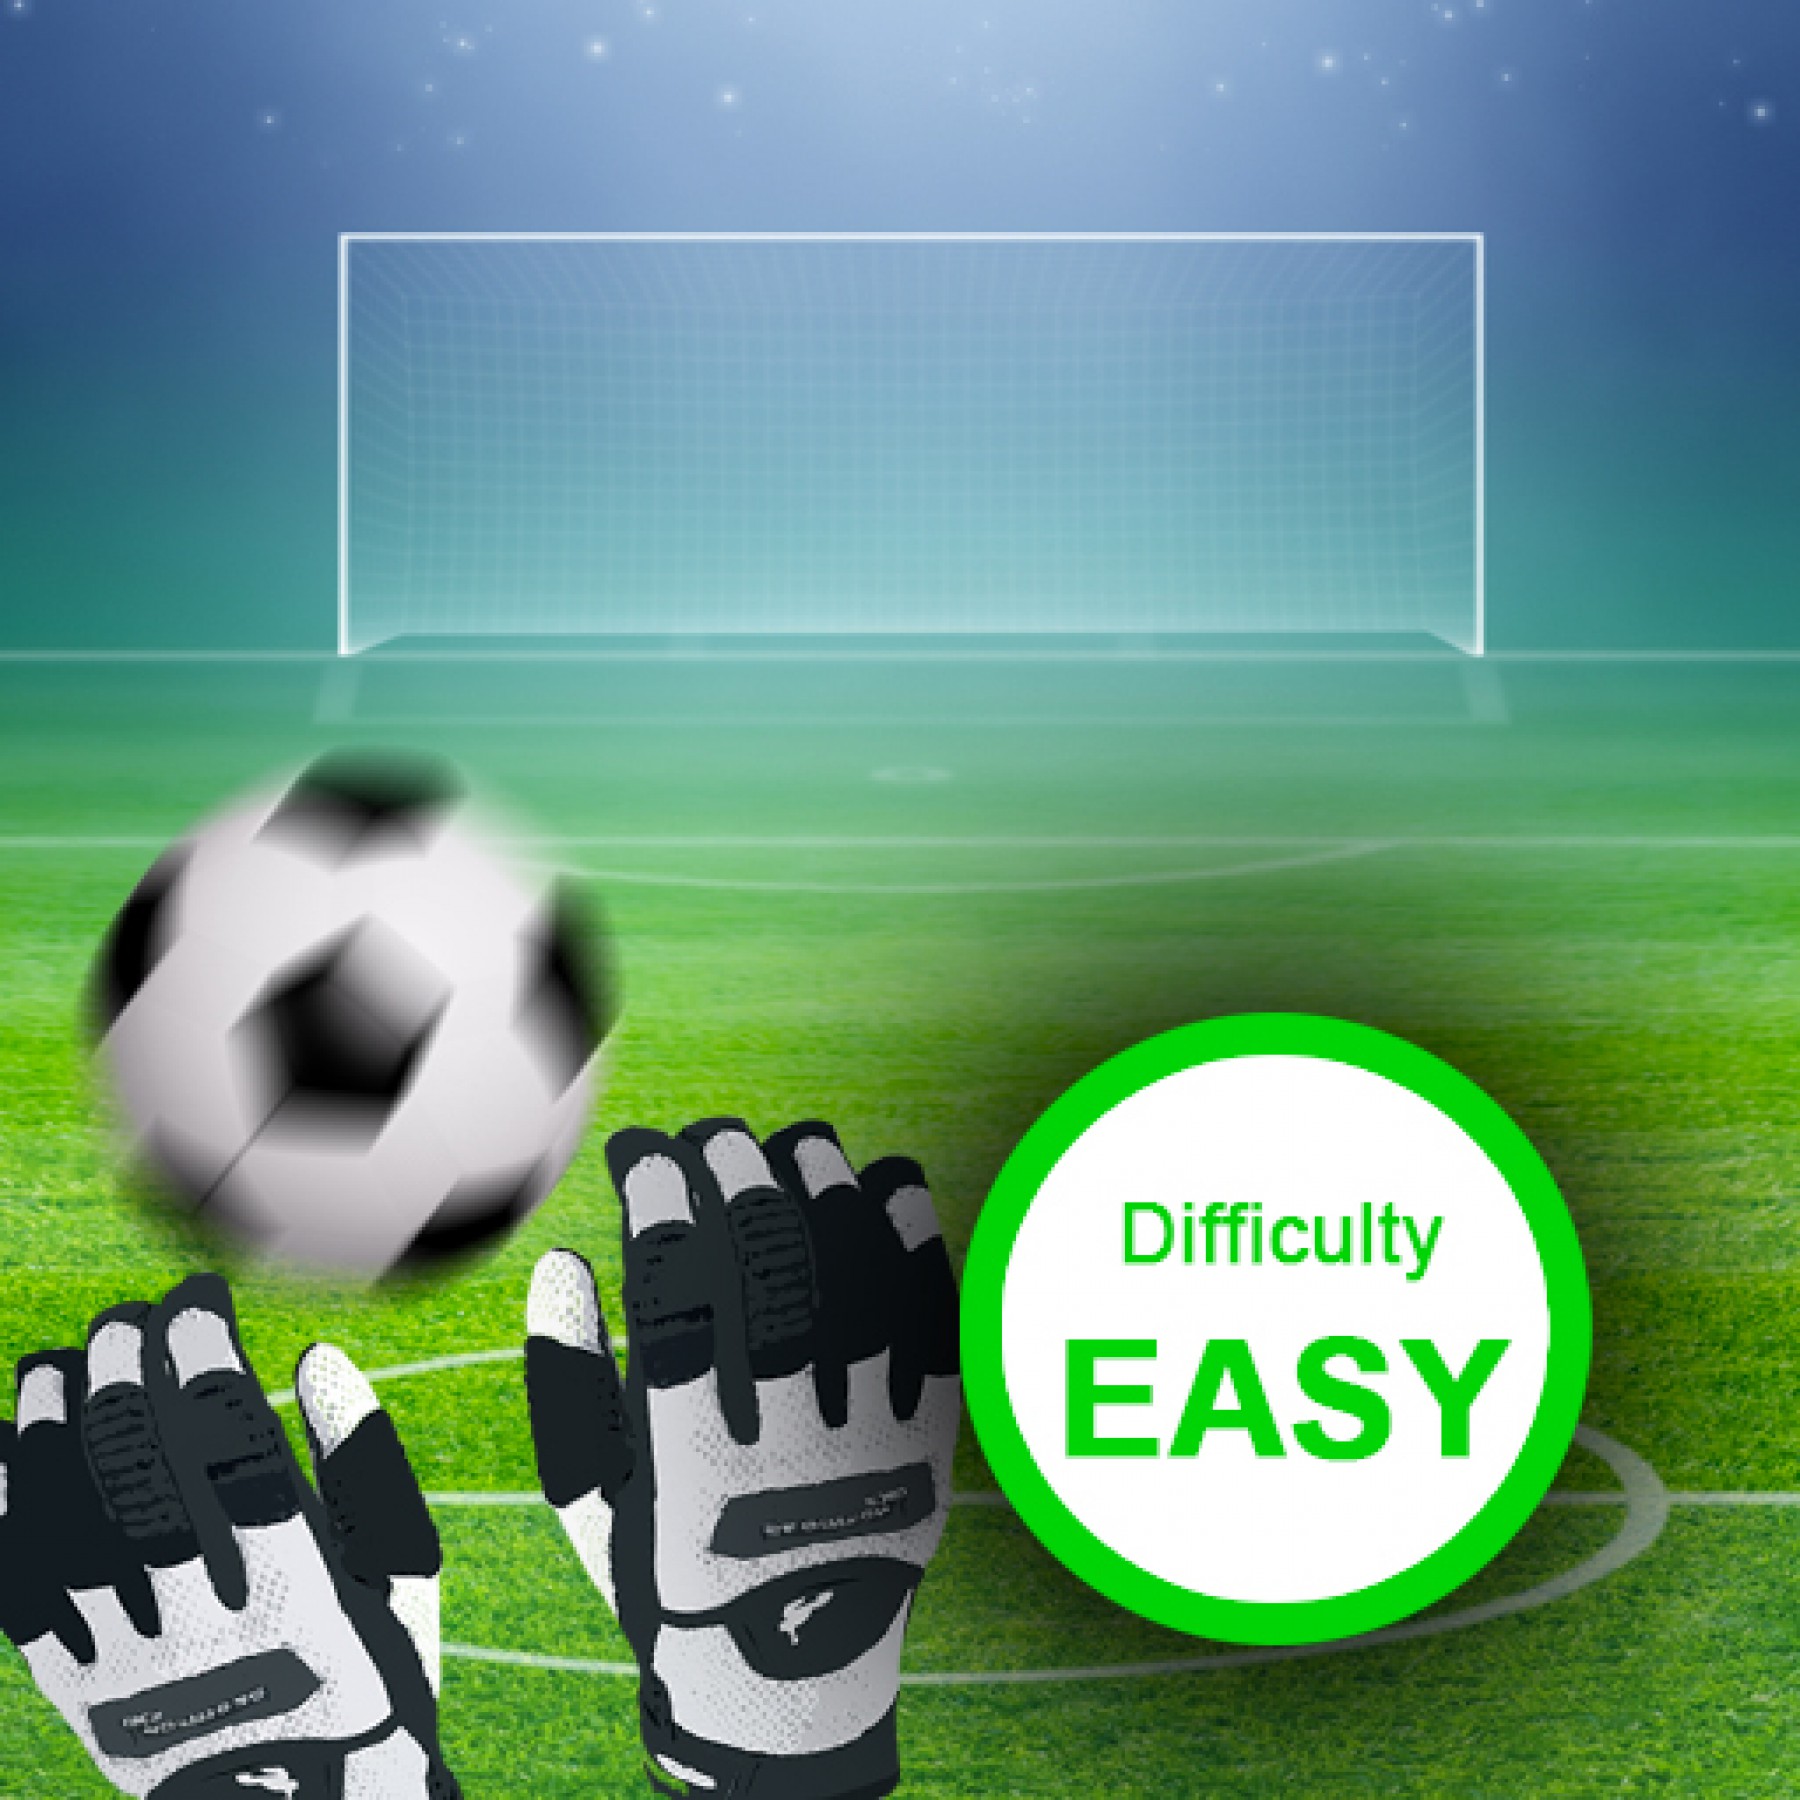 easy-penalty-shootout-games-playtime-active-kids-sports-adults-main-location1